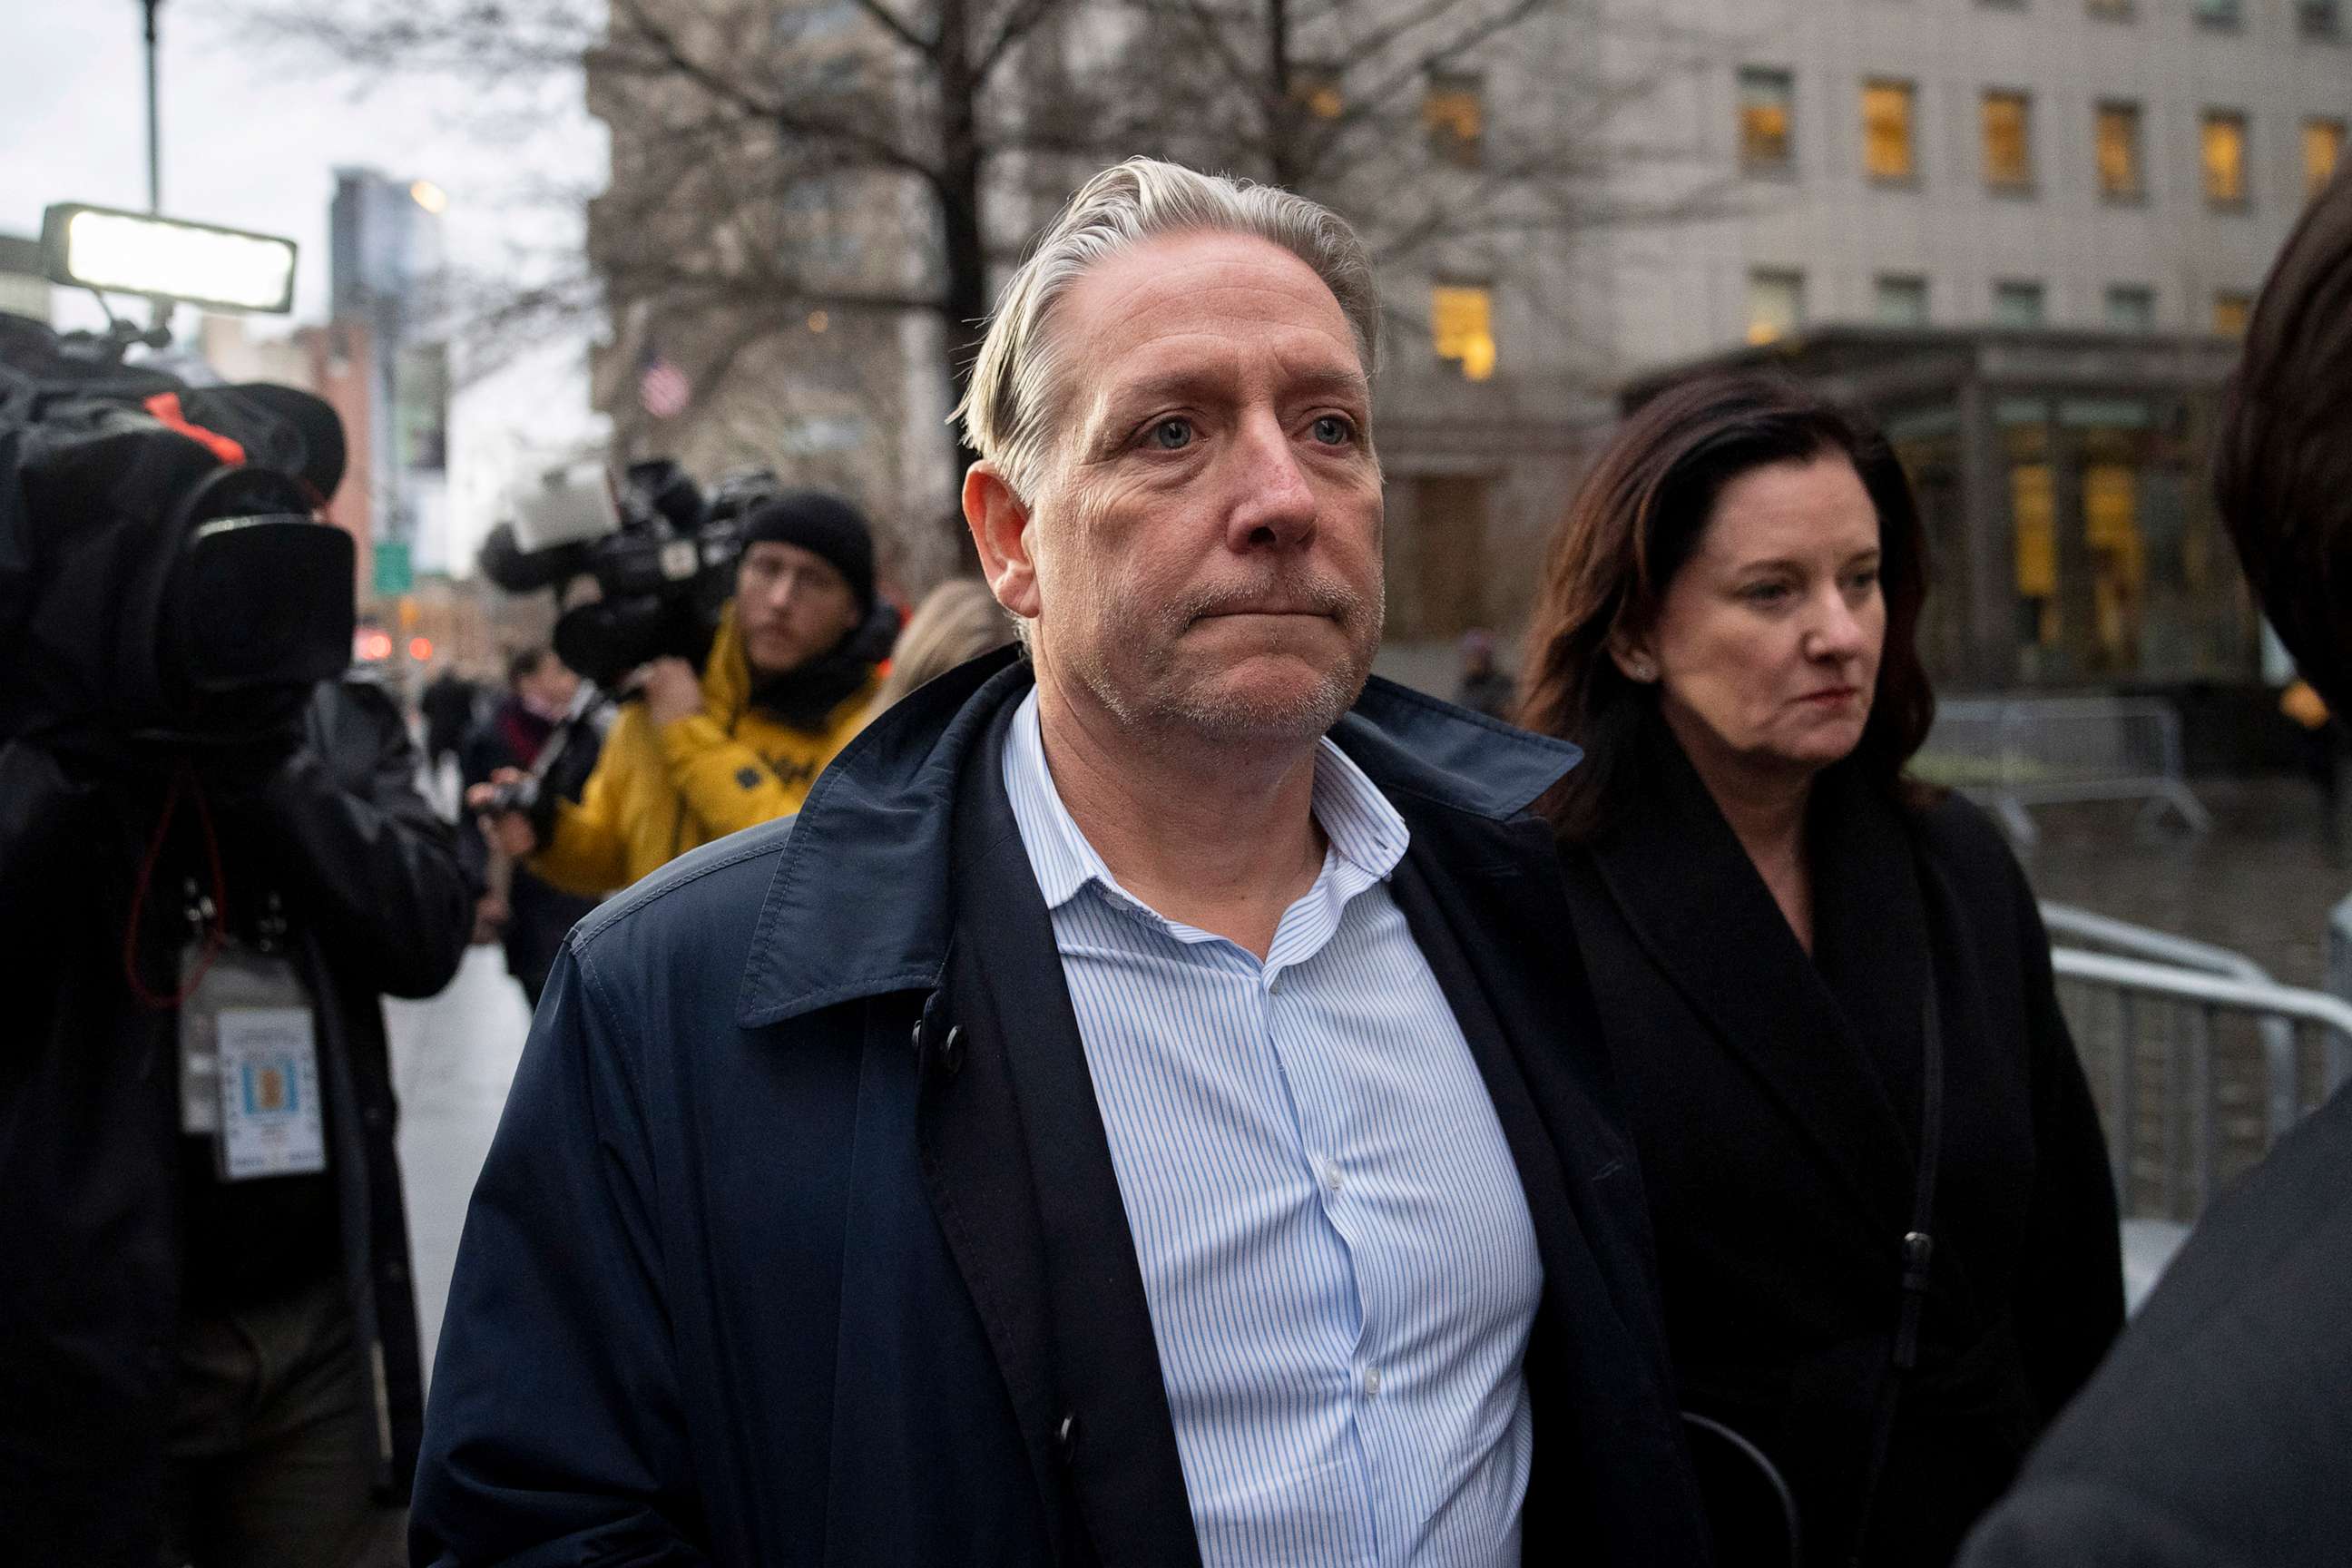 PHOTO: In this Jan. 23, 2023, file photo, Charles McGonigal, former special agent in charge of the FBI's counterintelligence division in New York, leaves court in New York.